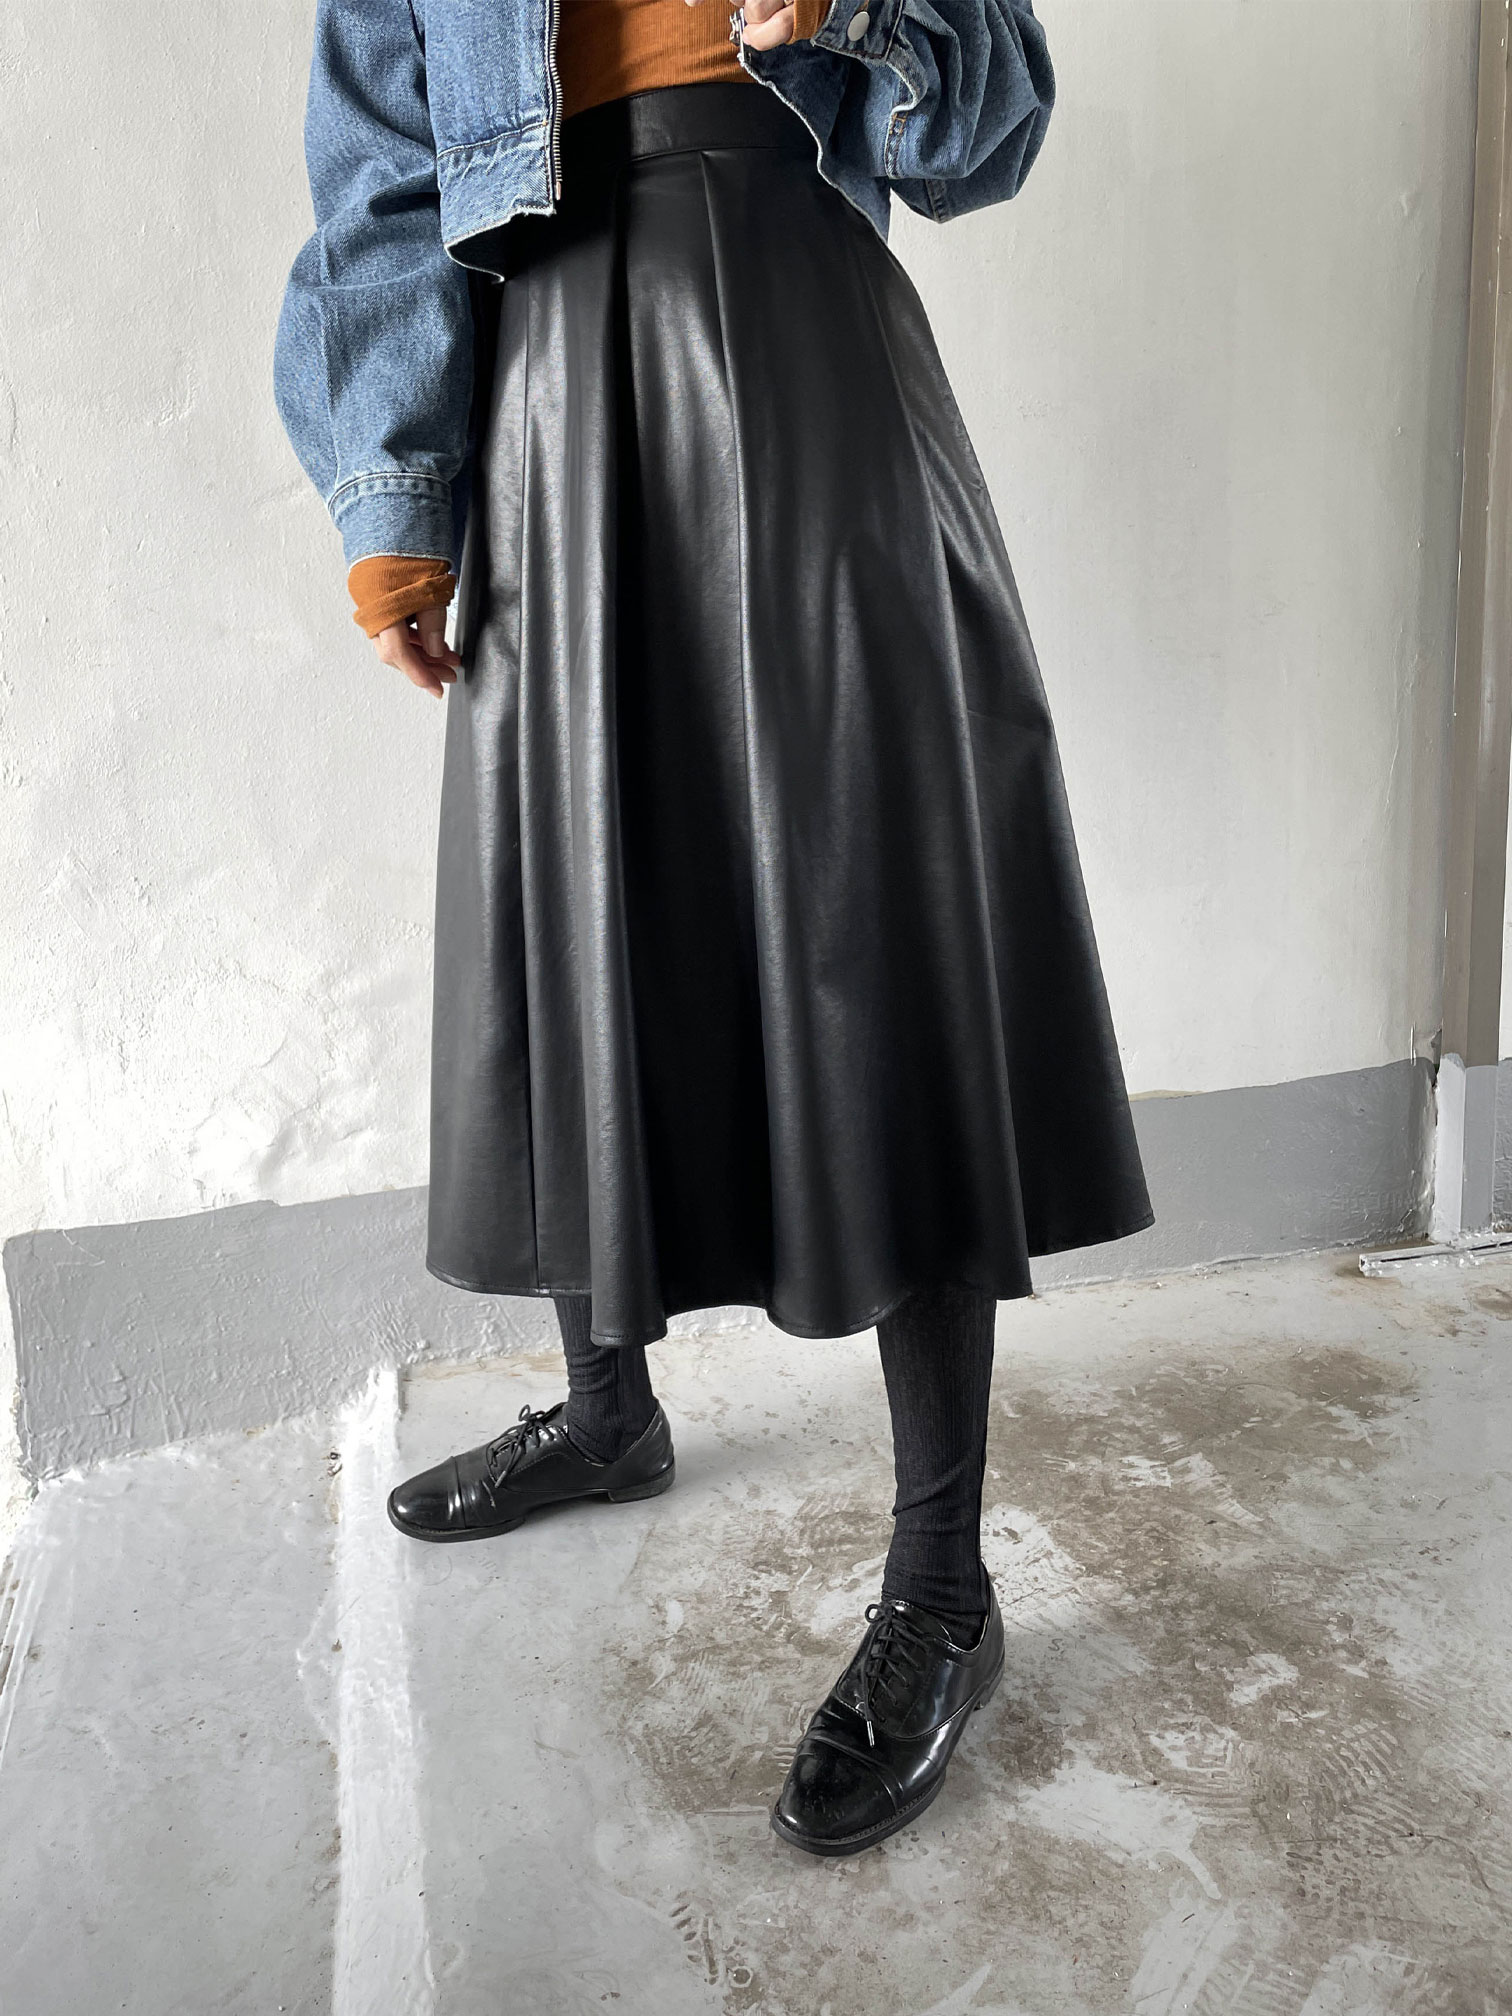 78 A leather skirt